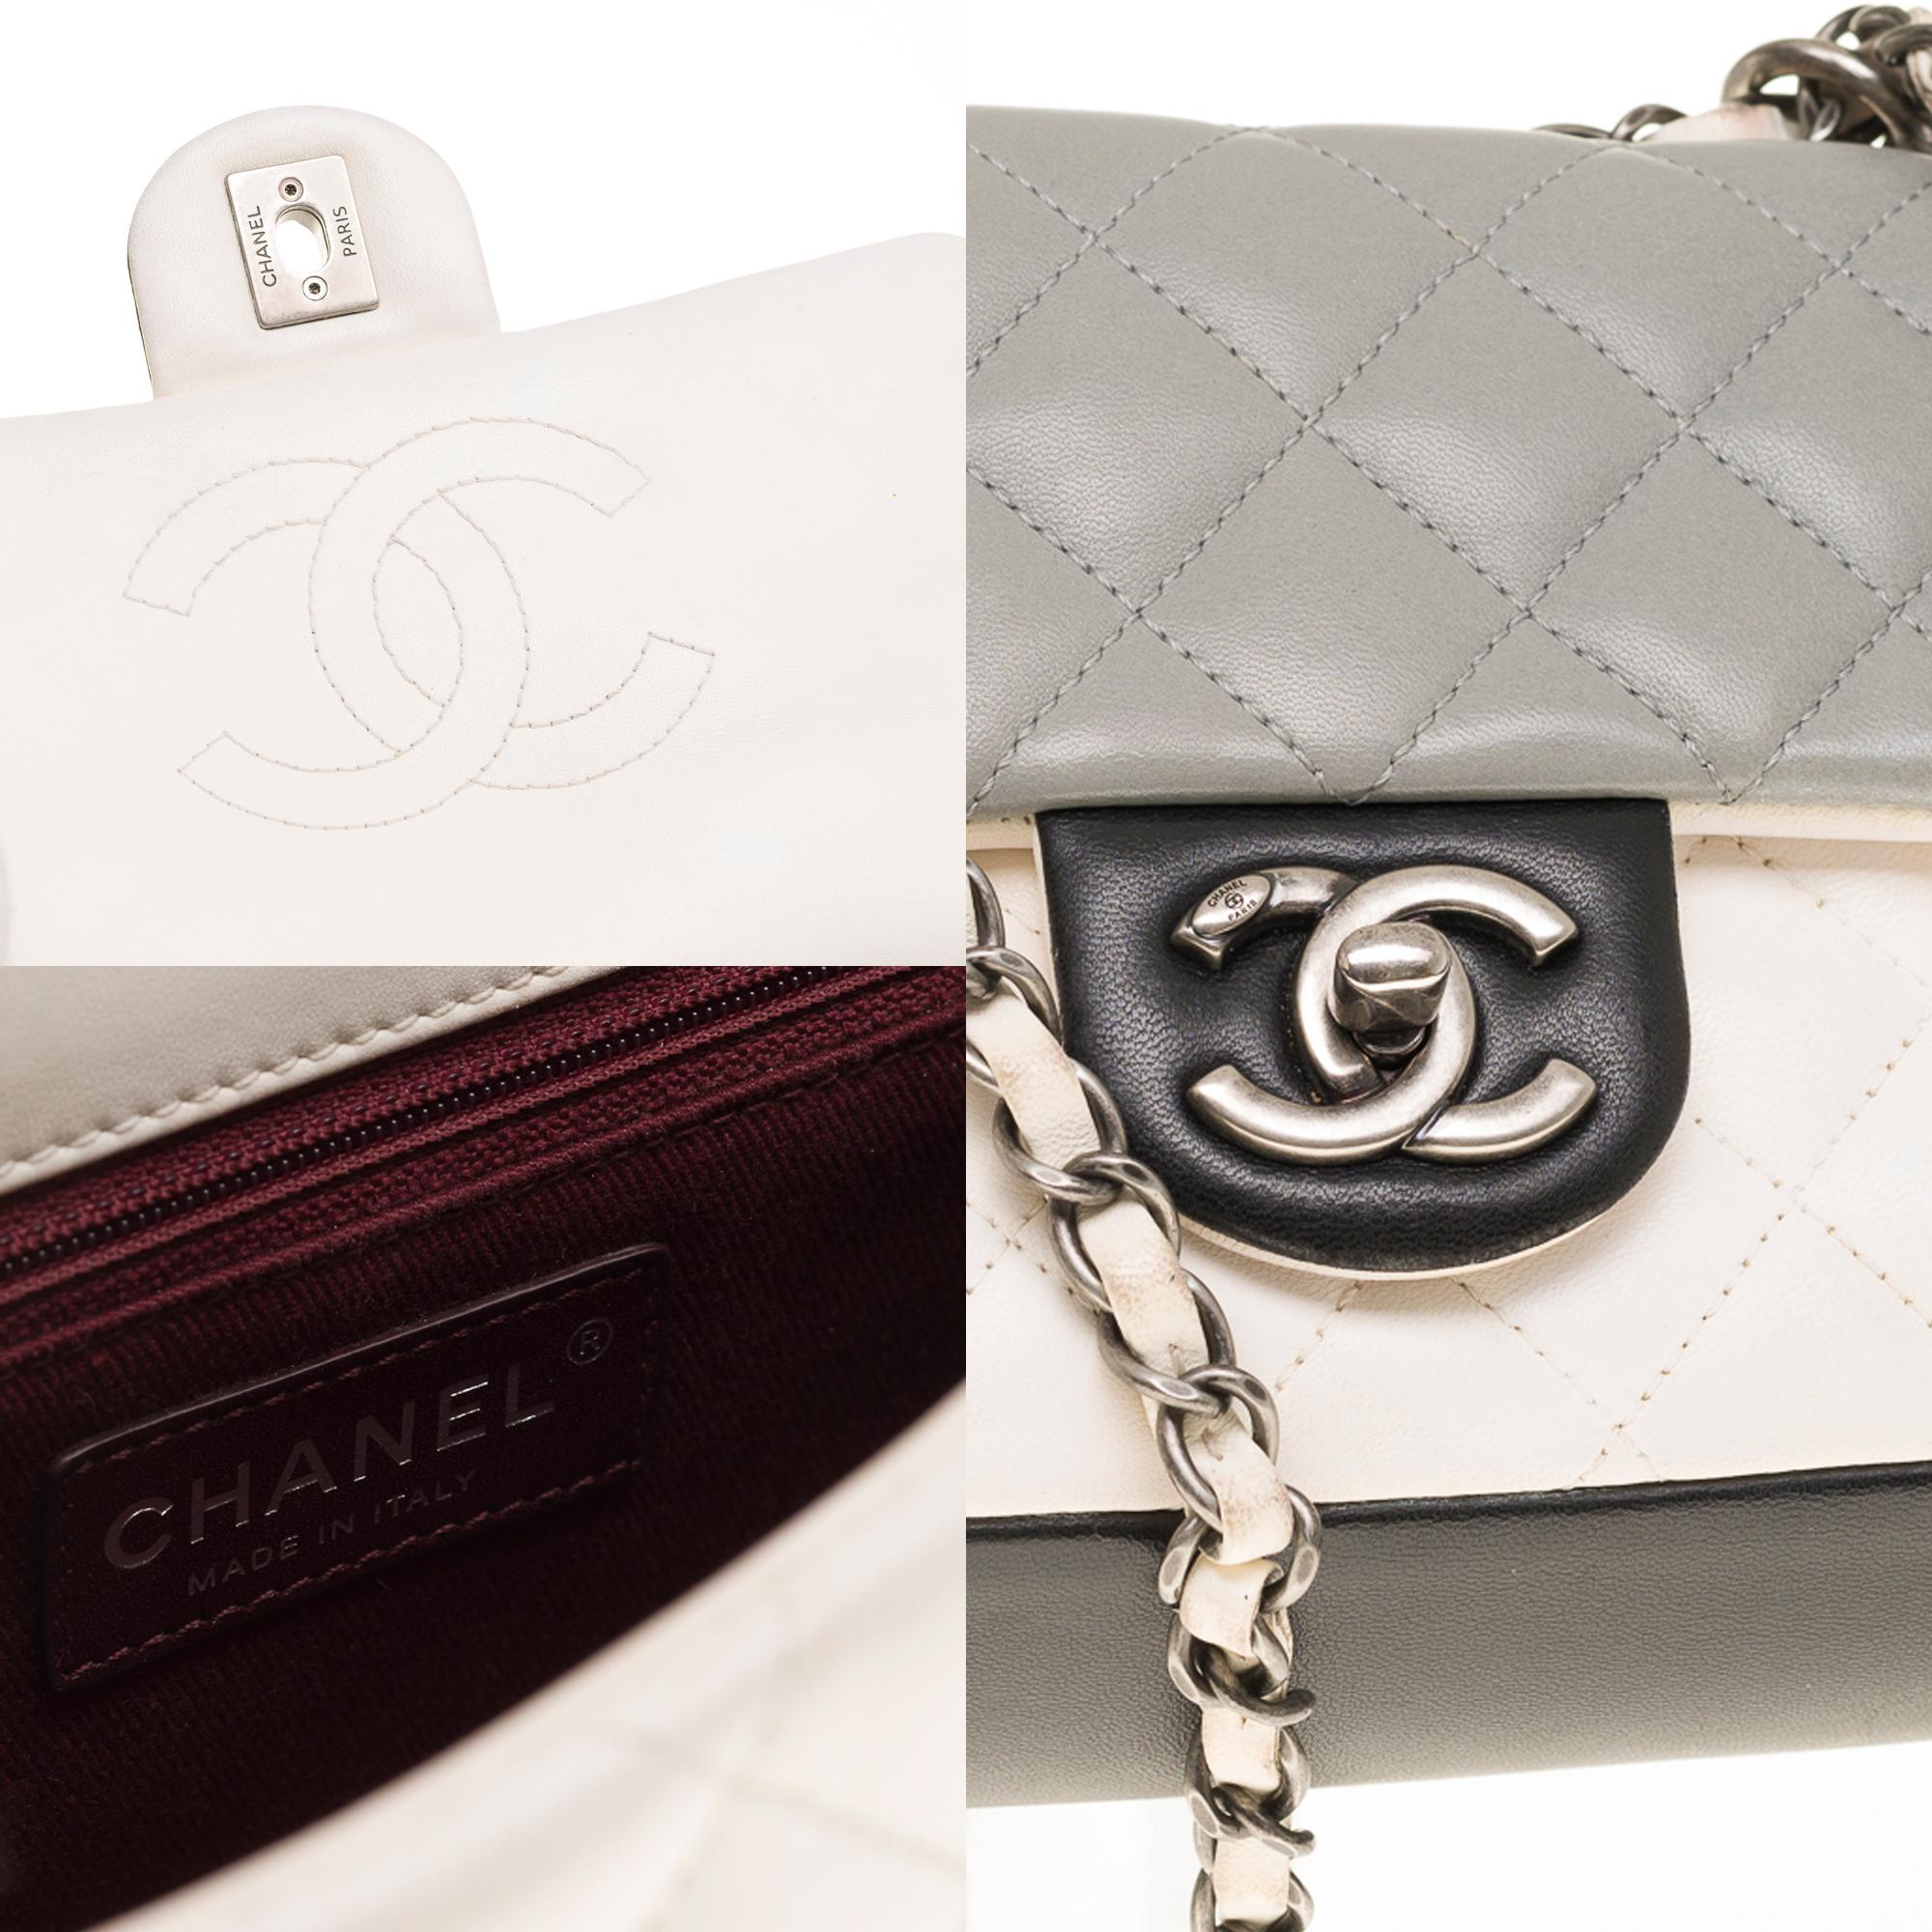 Women's Chanel Classic single Flap shoulder bag in grey/black/white quilted lambskin, SHW